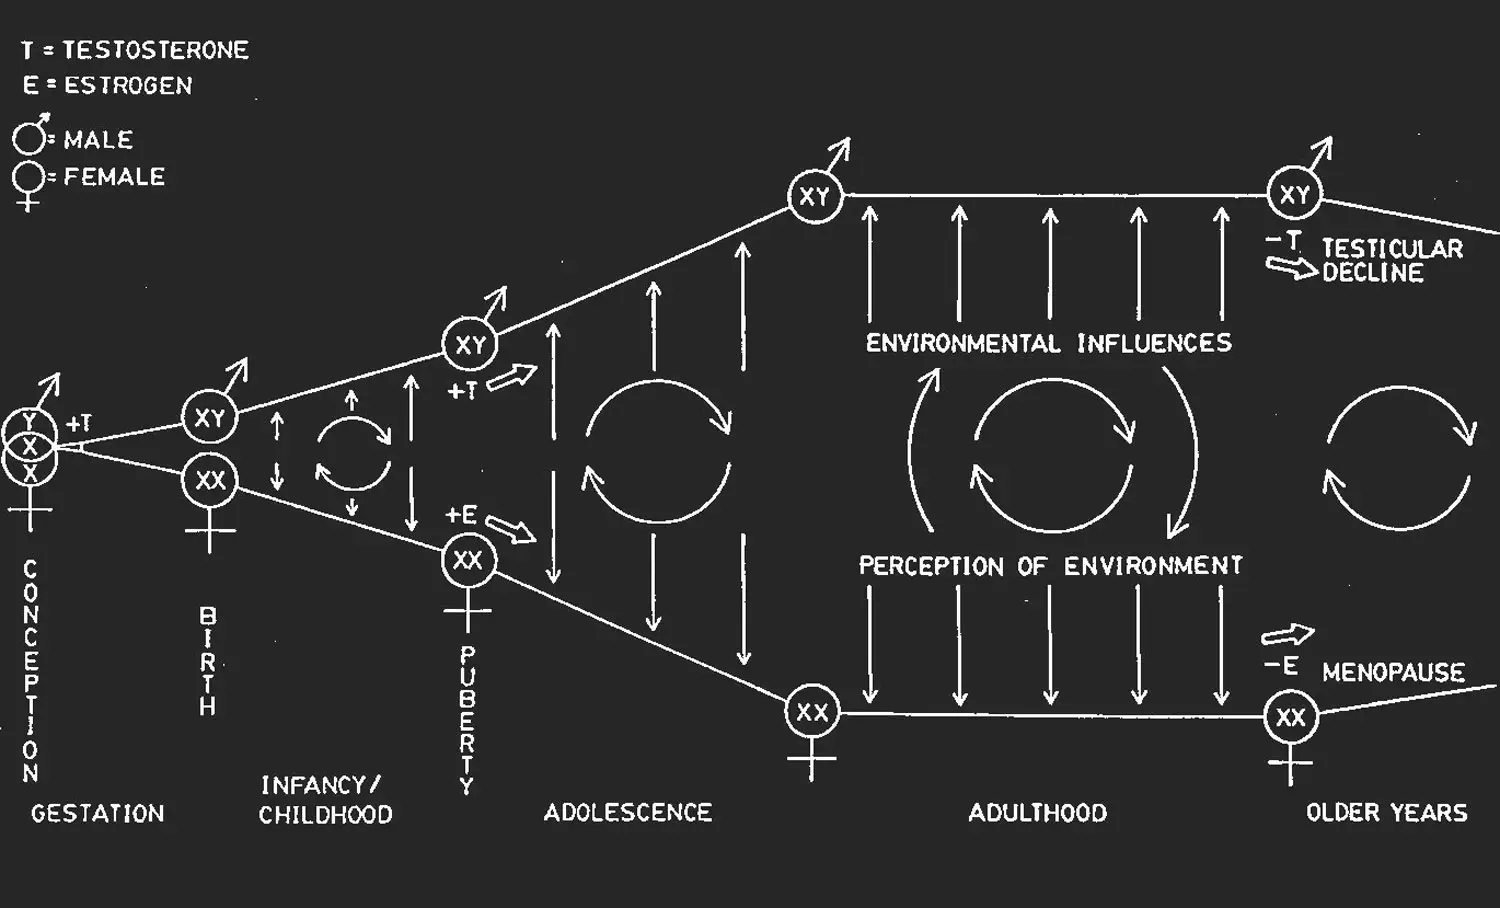 A diagram that shows the diverging paths of males and females from “gestation” to “infancy/childhood” to “adolescence” to “adulthood” to finally “older years.” The diagram shows increasing differentiation from birth to puberty and the ongoing feedback interaction with “environmental influences” and the “perception of environment.”